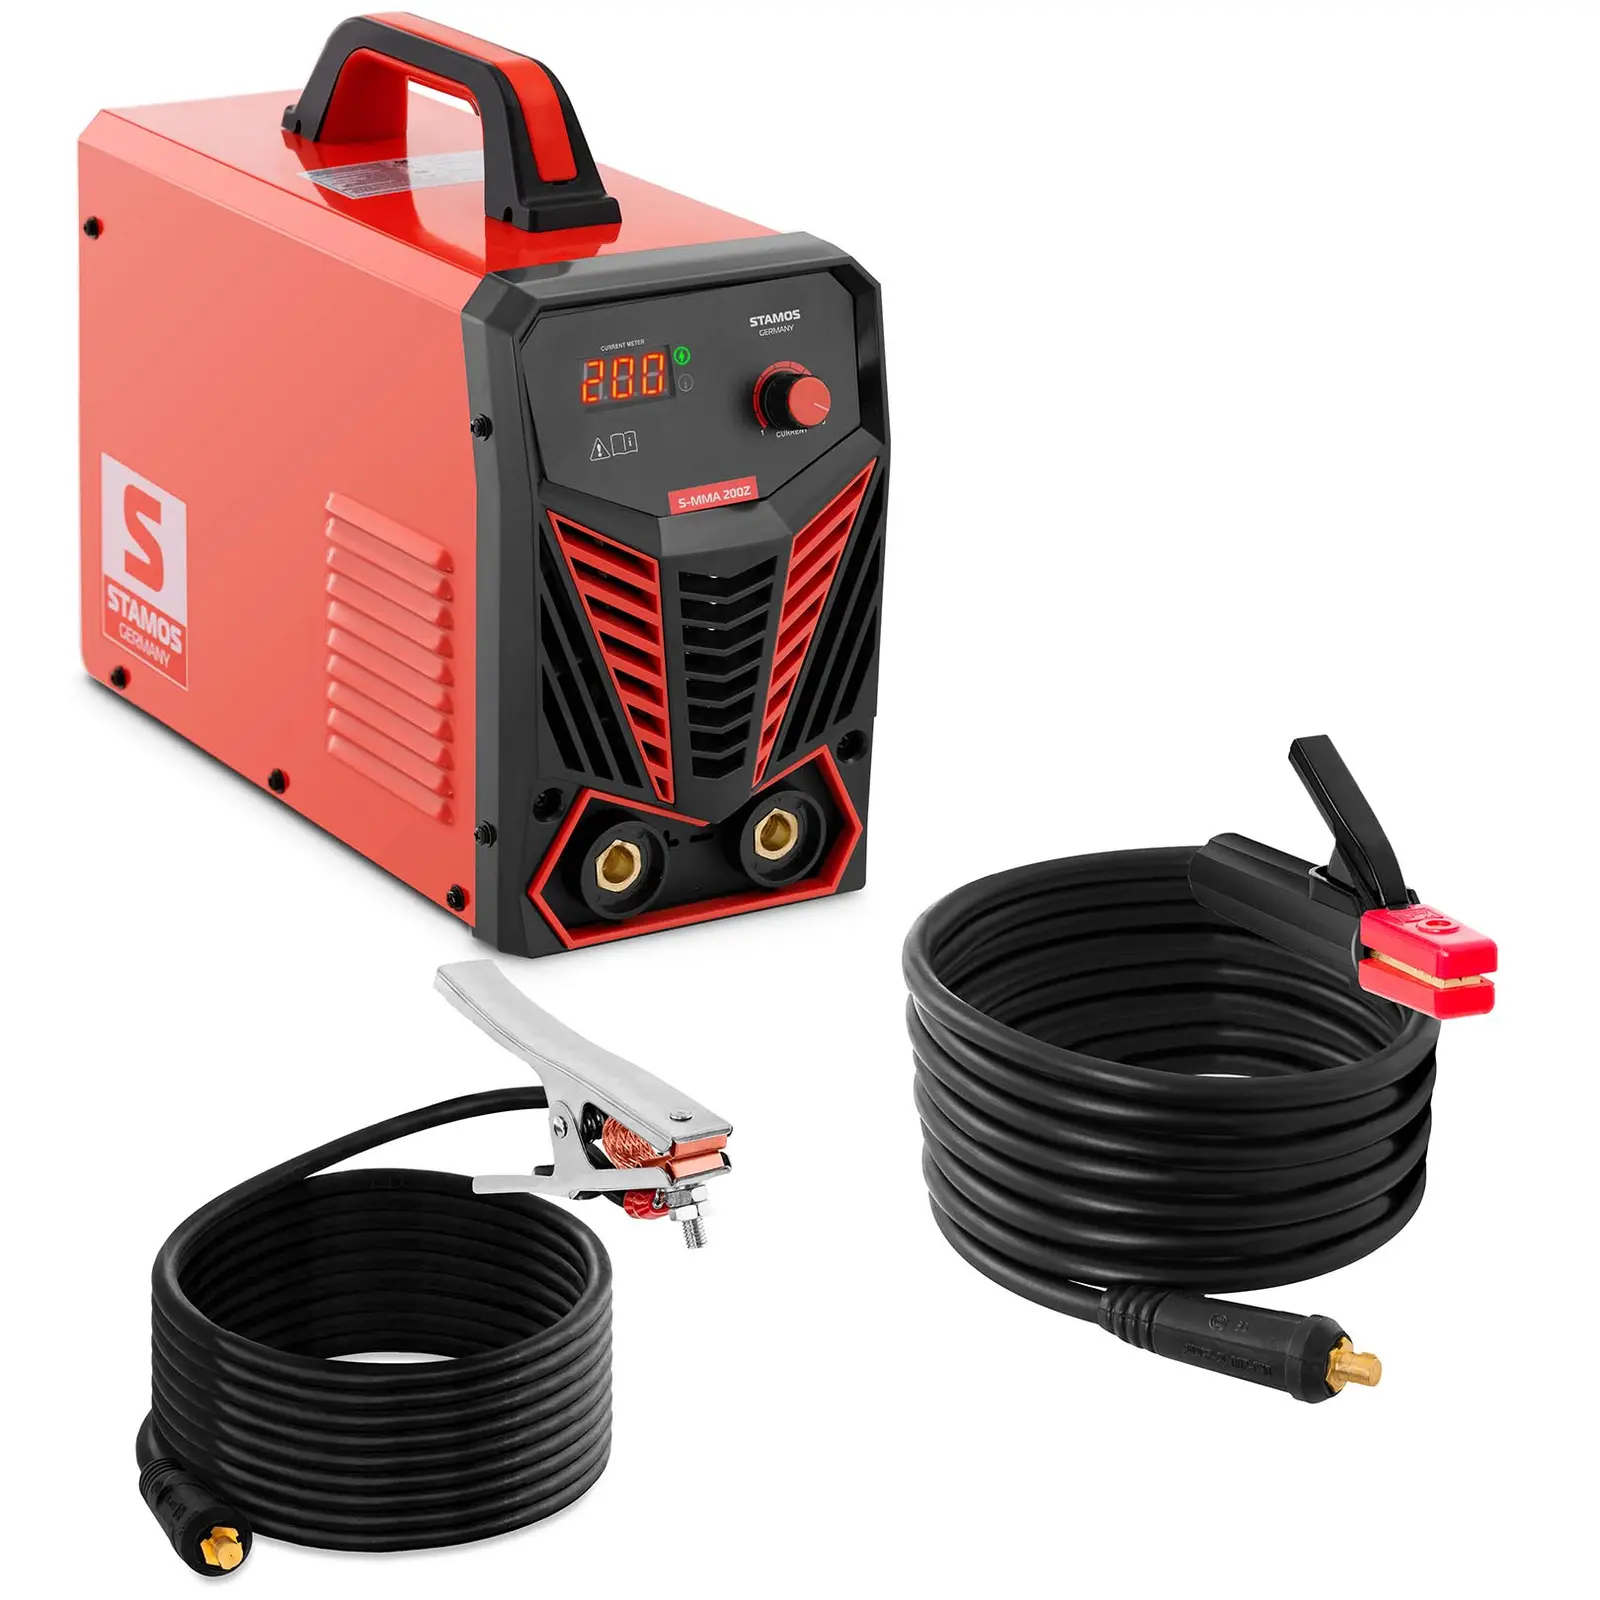 Arc Welder - IGBT - 200 A - Hot Start - 8 m cable - Duty Cycle 60 %